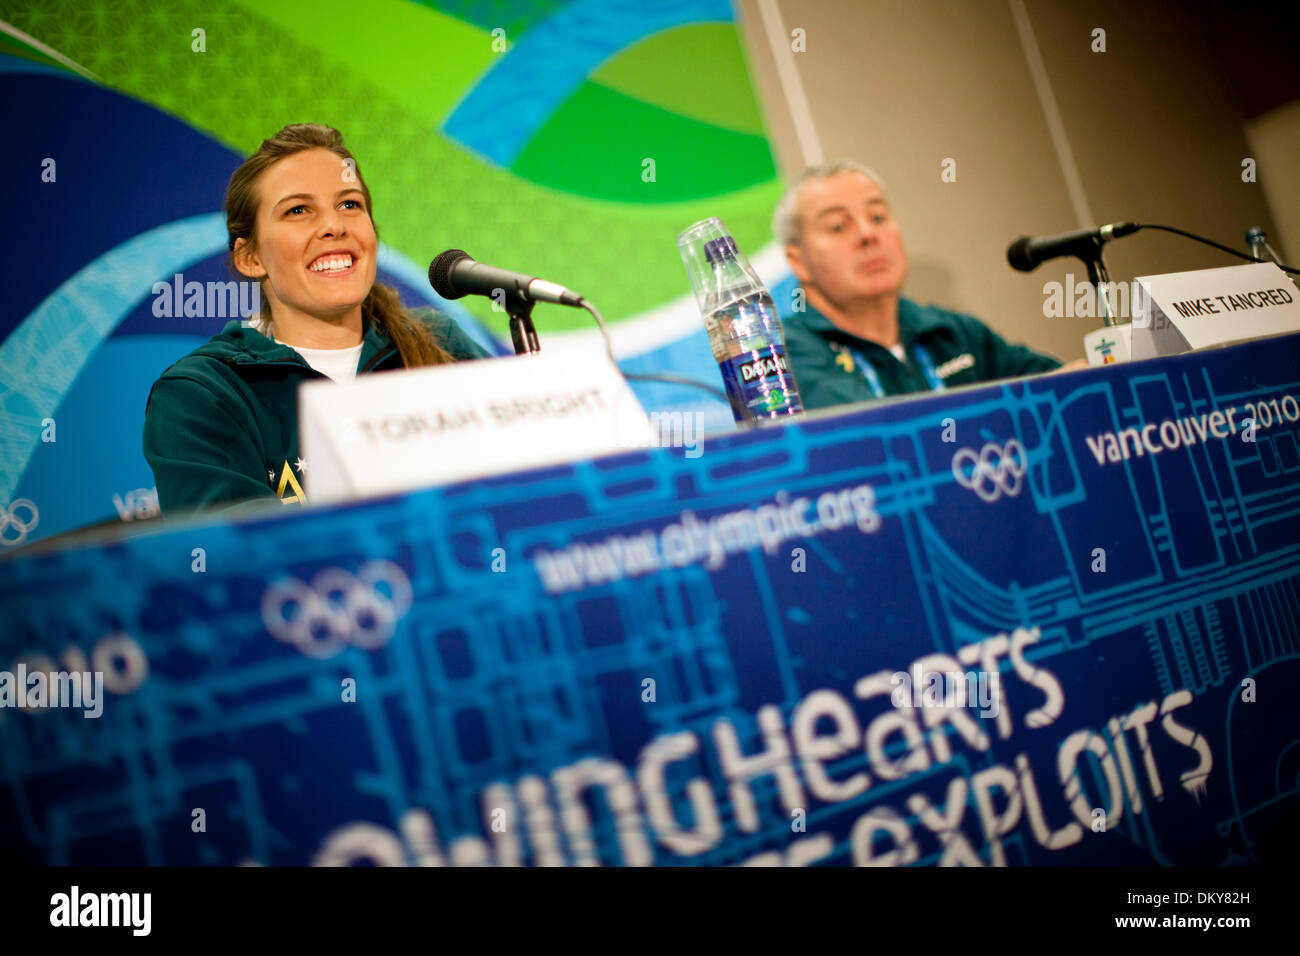 Feb 18, 2010 - Vancouver, British Columbia, Canada - Women's snowboarding half-pipe gold medalist TORAH BRIGHT during a press conference at the 2010 Winter Olympics (Credit Image: ZUMApress.com) Stock Photo